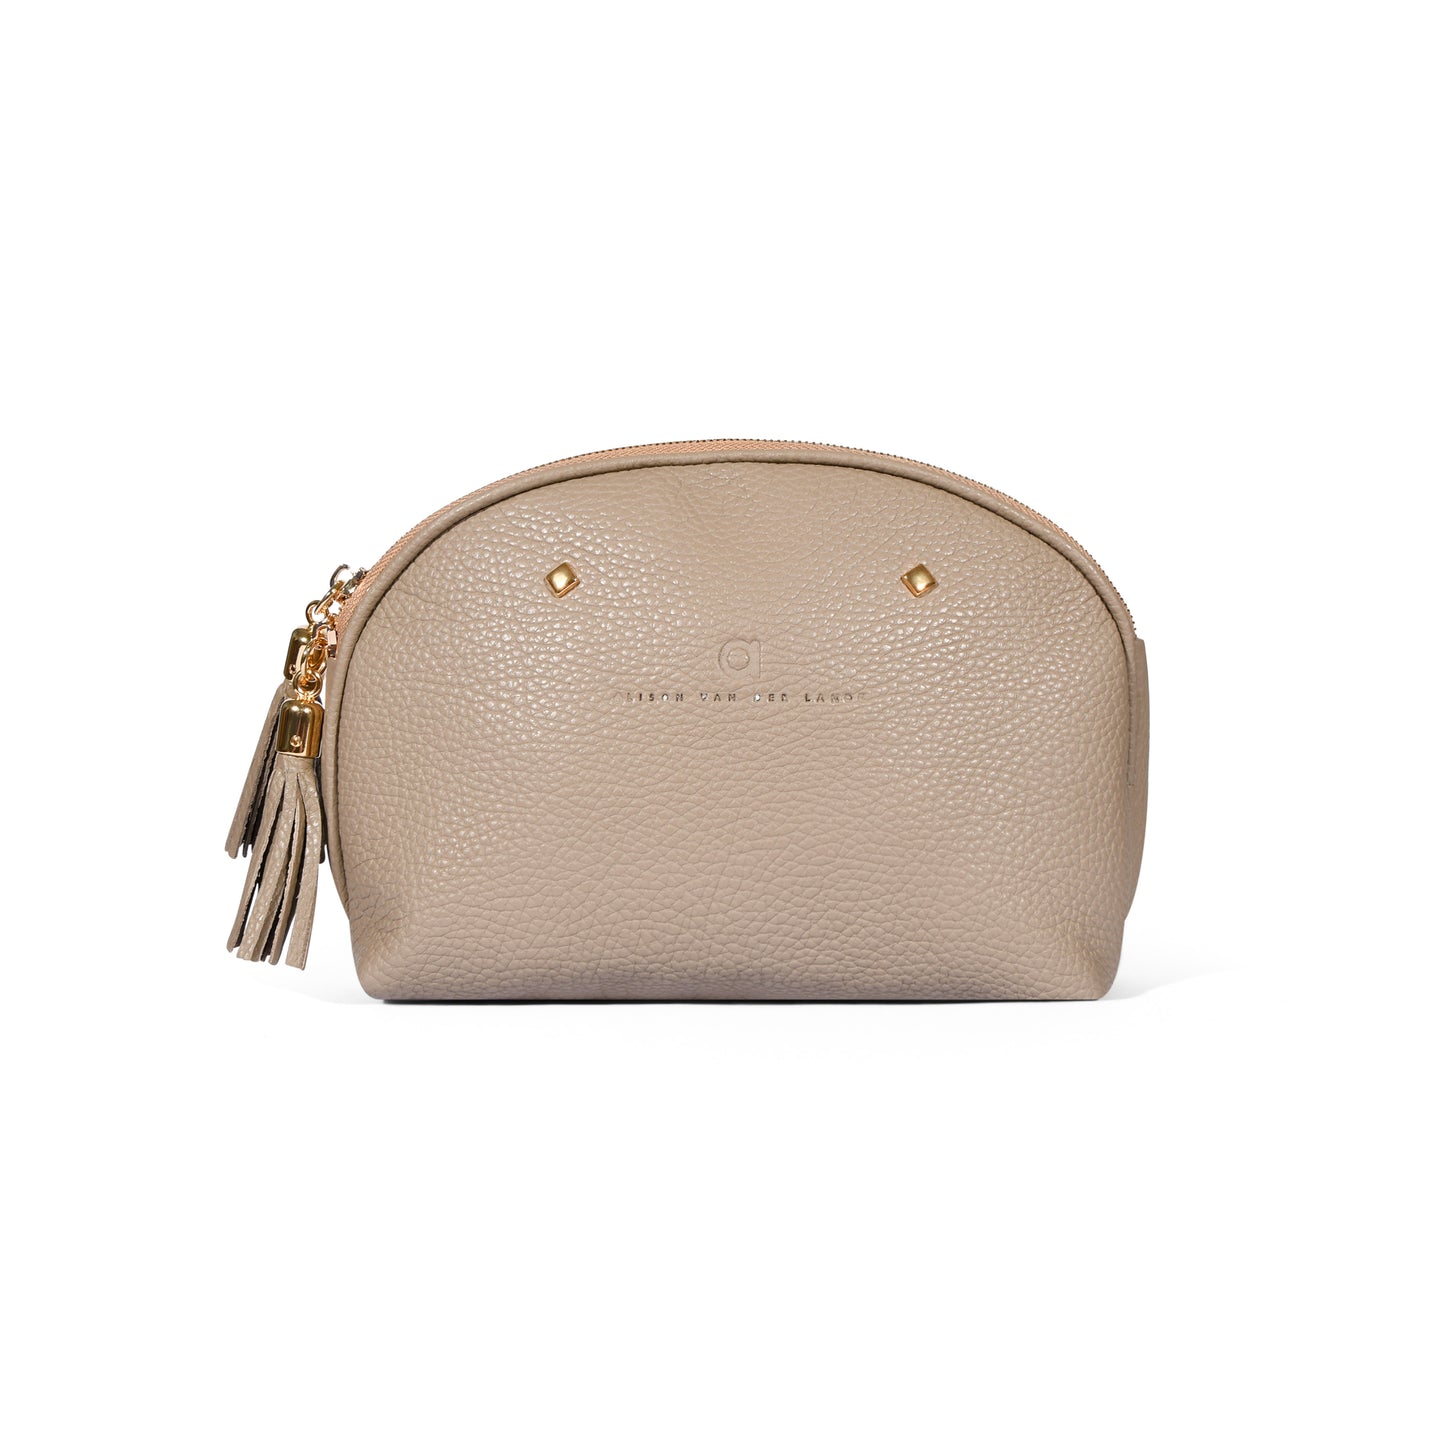 NEW HALF MOON MAKE-UP BAG - TAUPE with GOLD